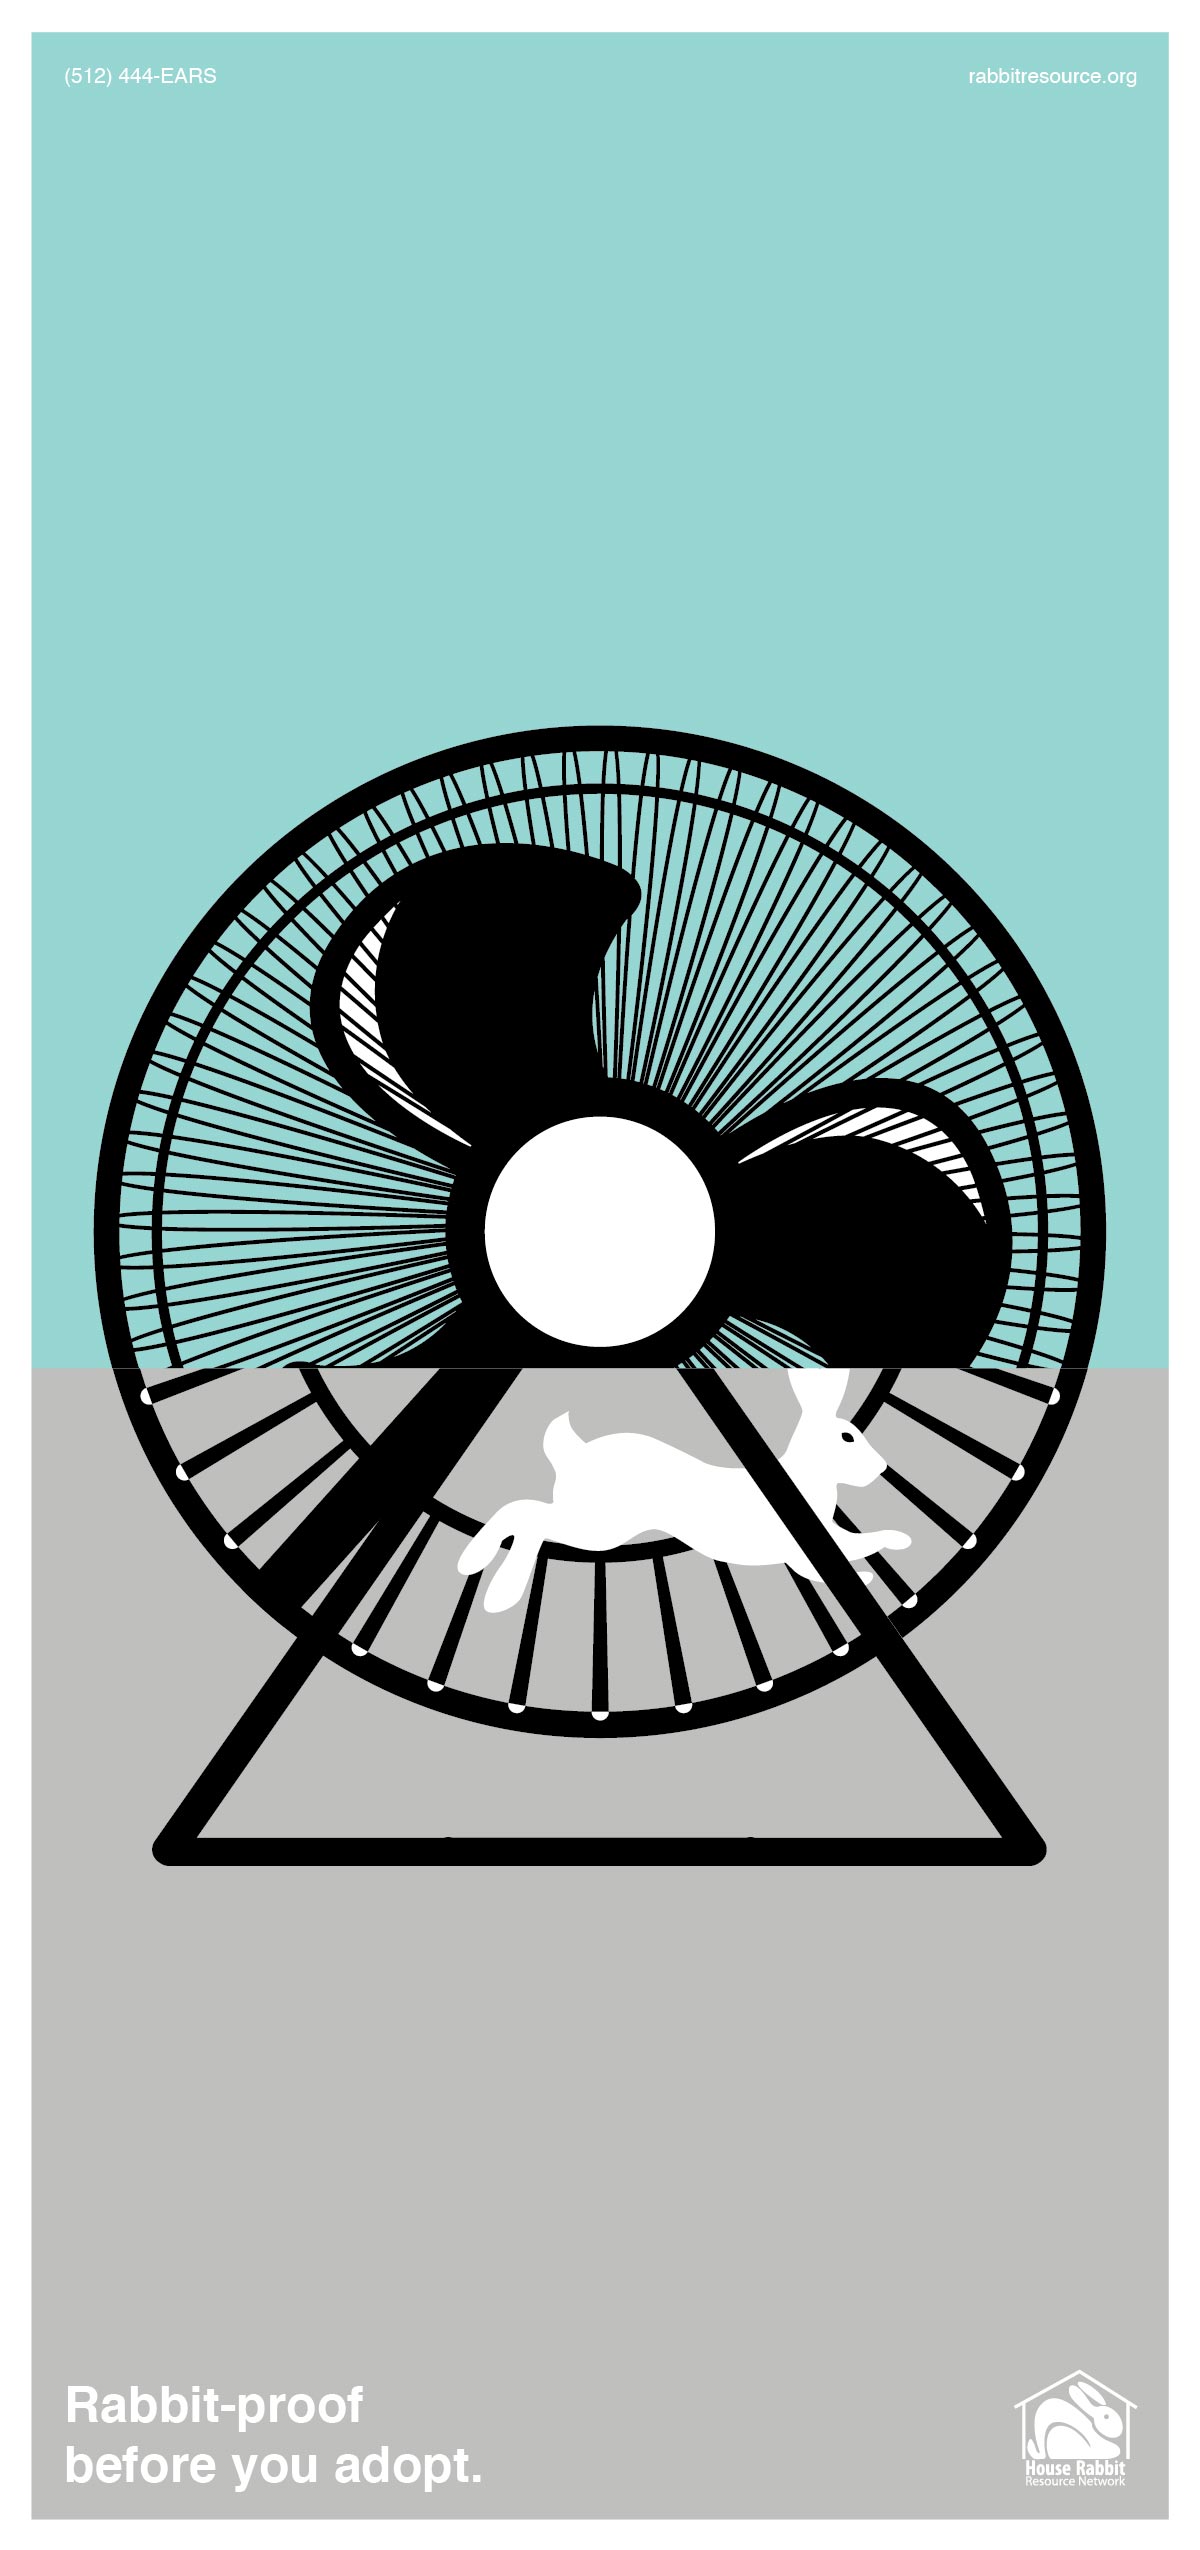 exercise wheel and spinning fan